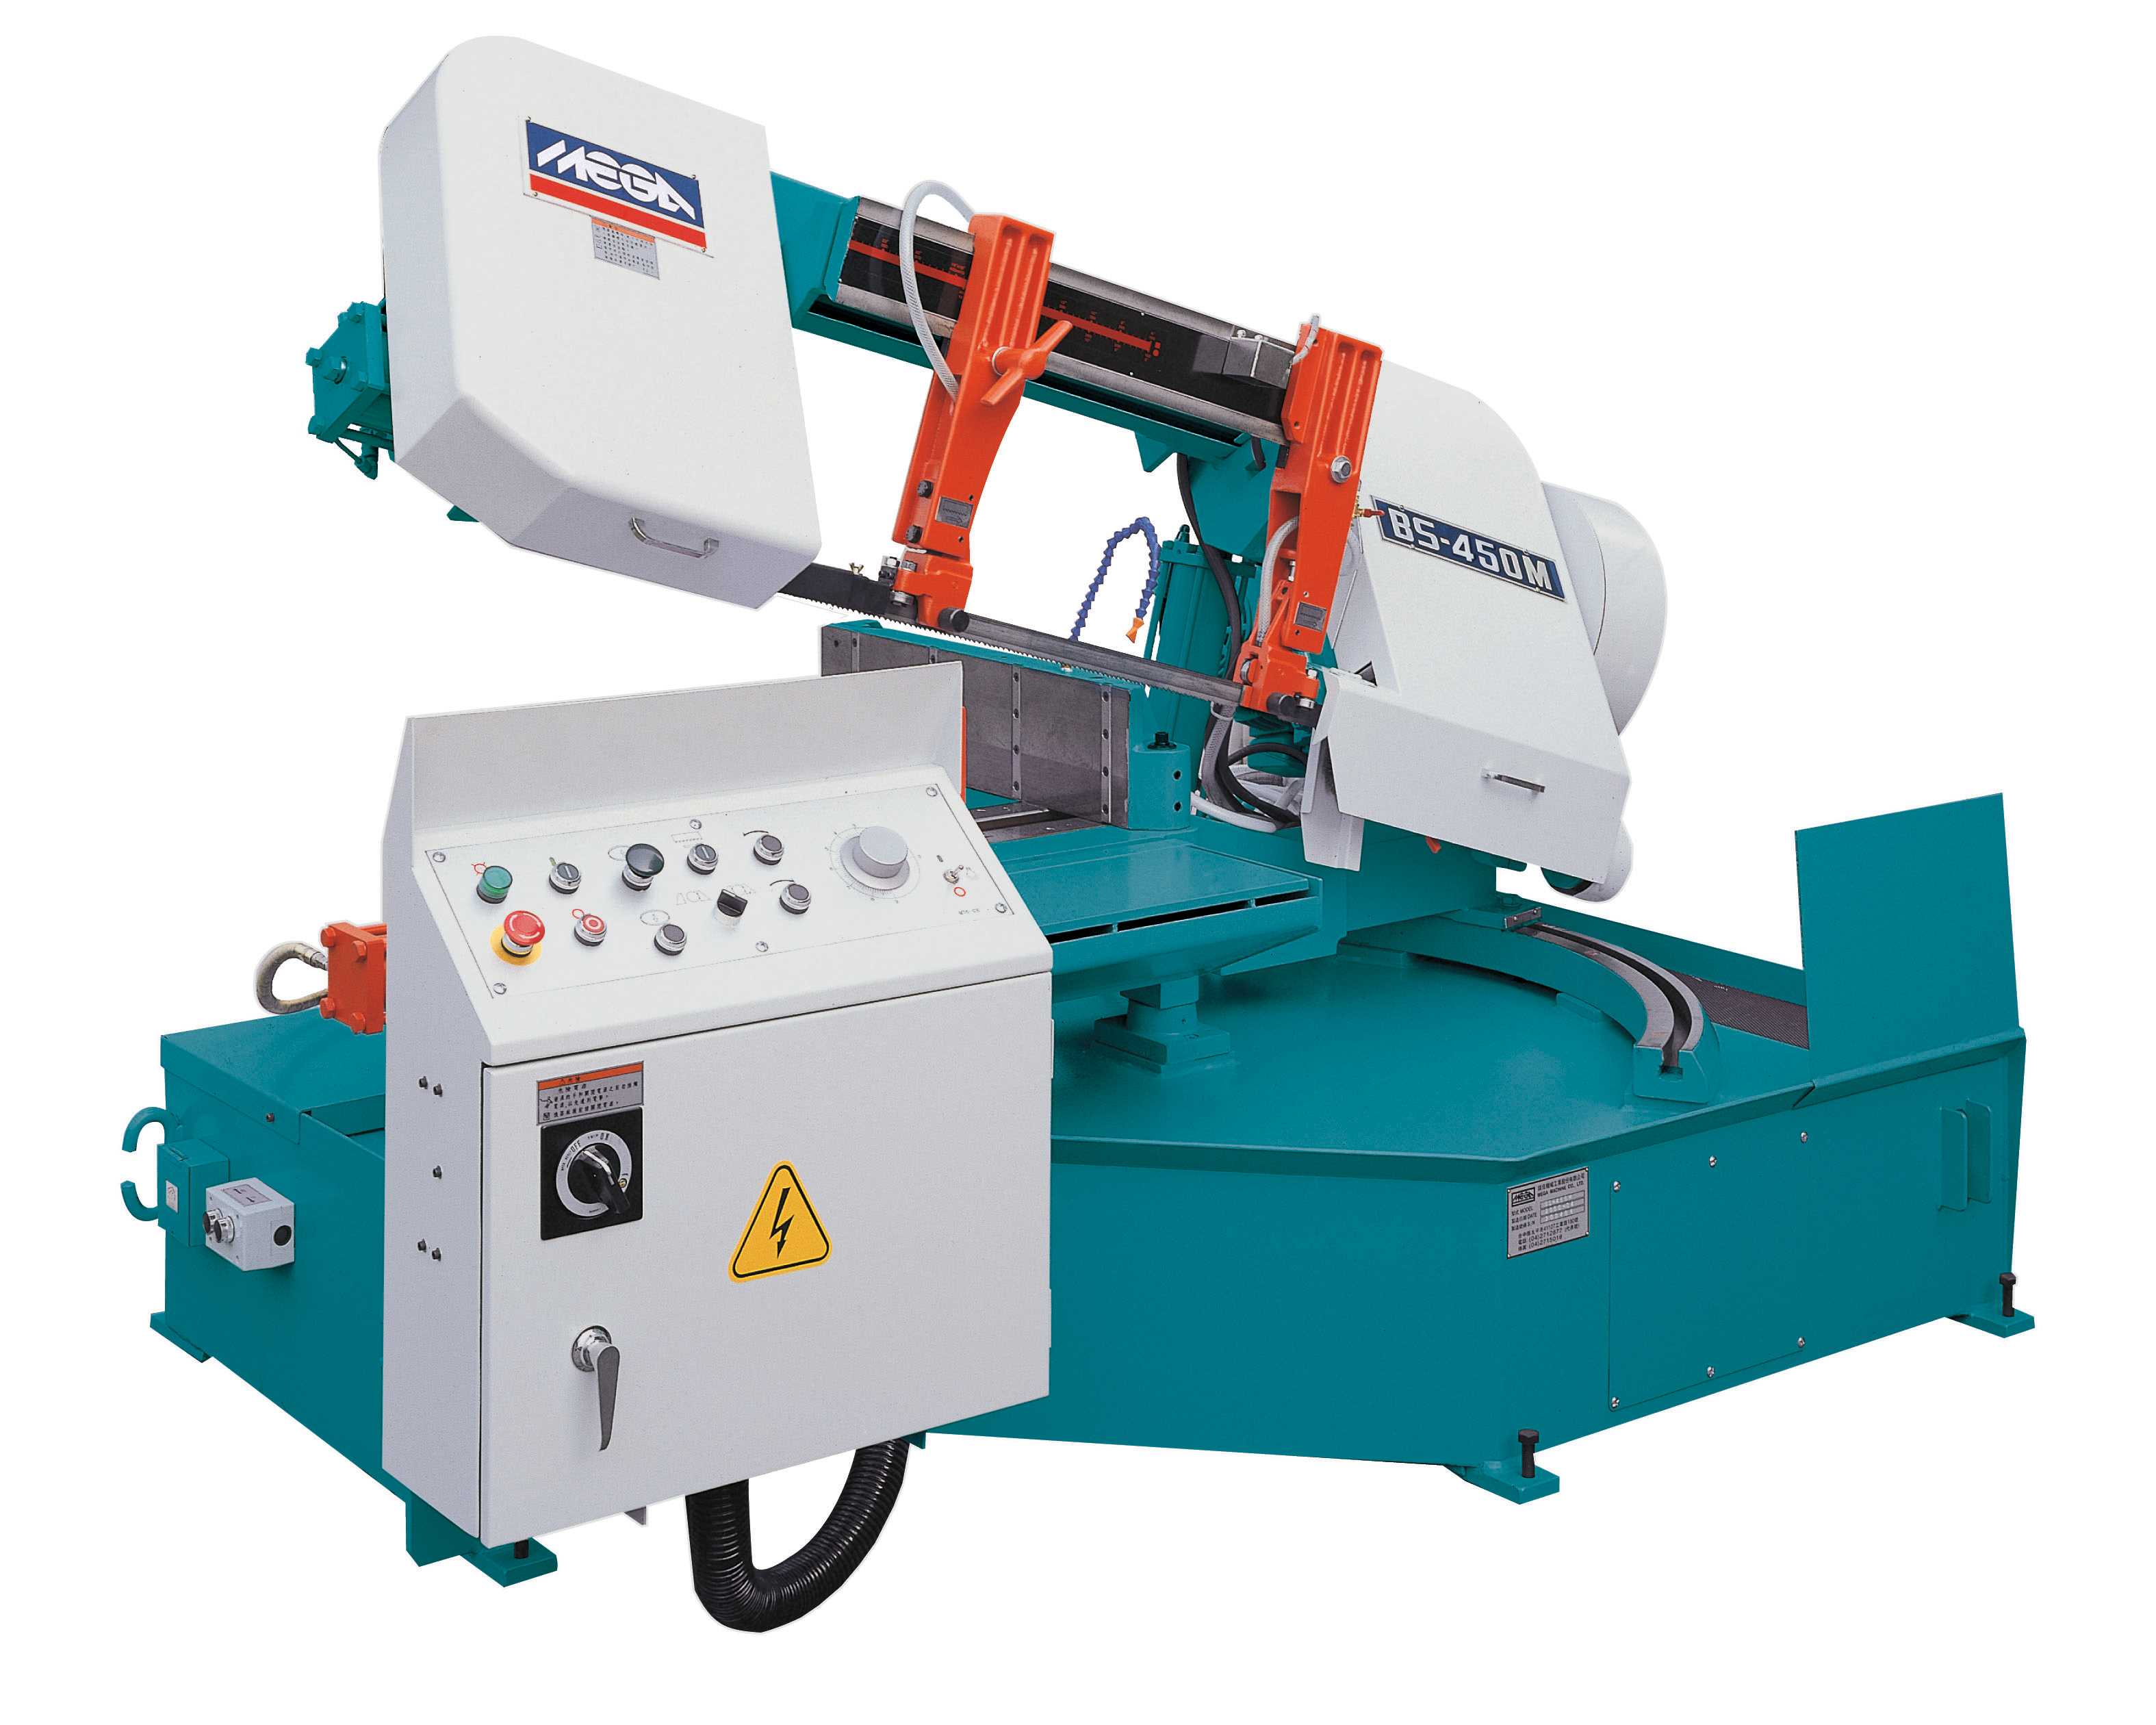 SEMI AUTOMATIC HORIZONTAL BANDSAWS (POWER TURNING TABLE MITRE CUTTING)-BS-450M